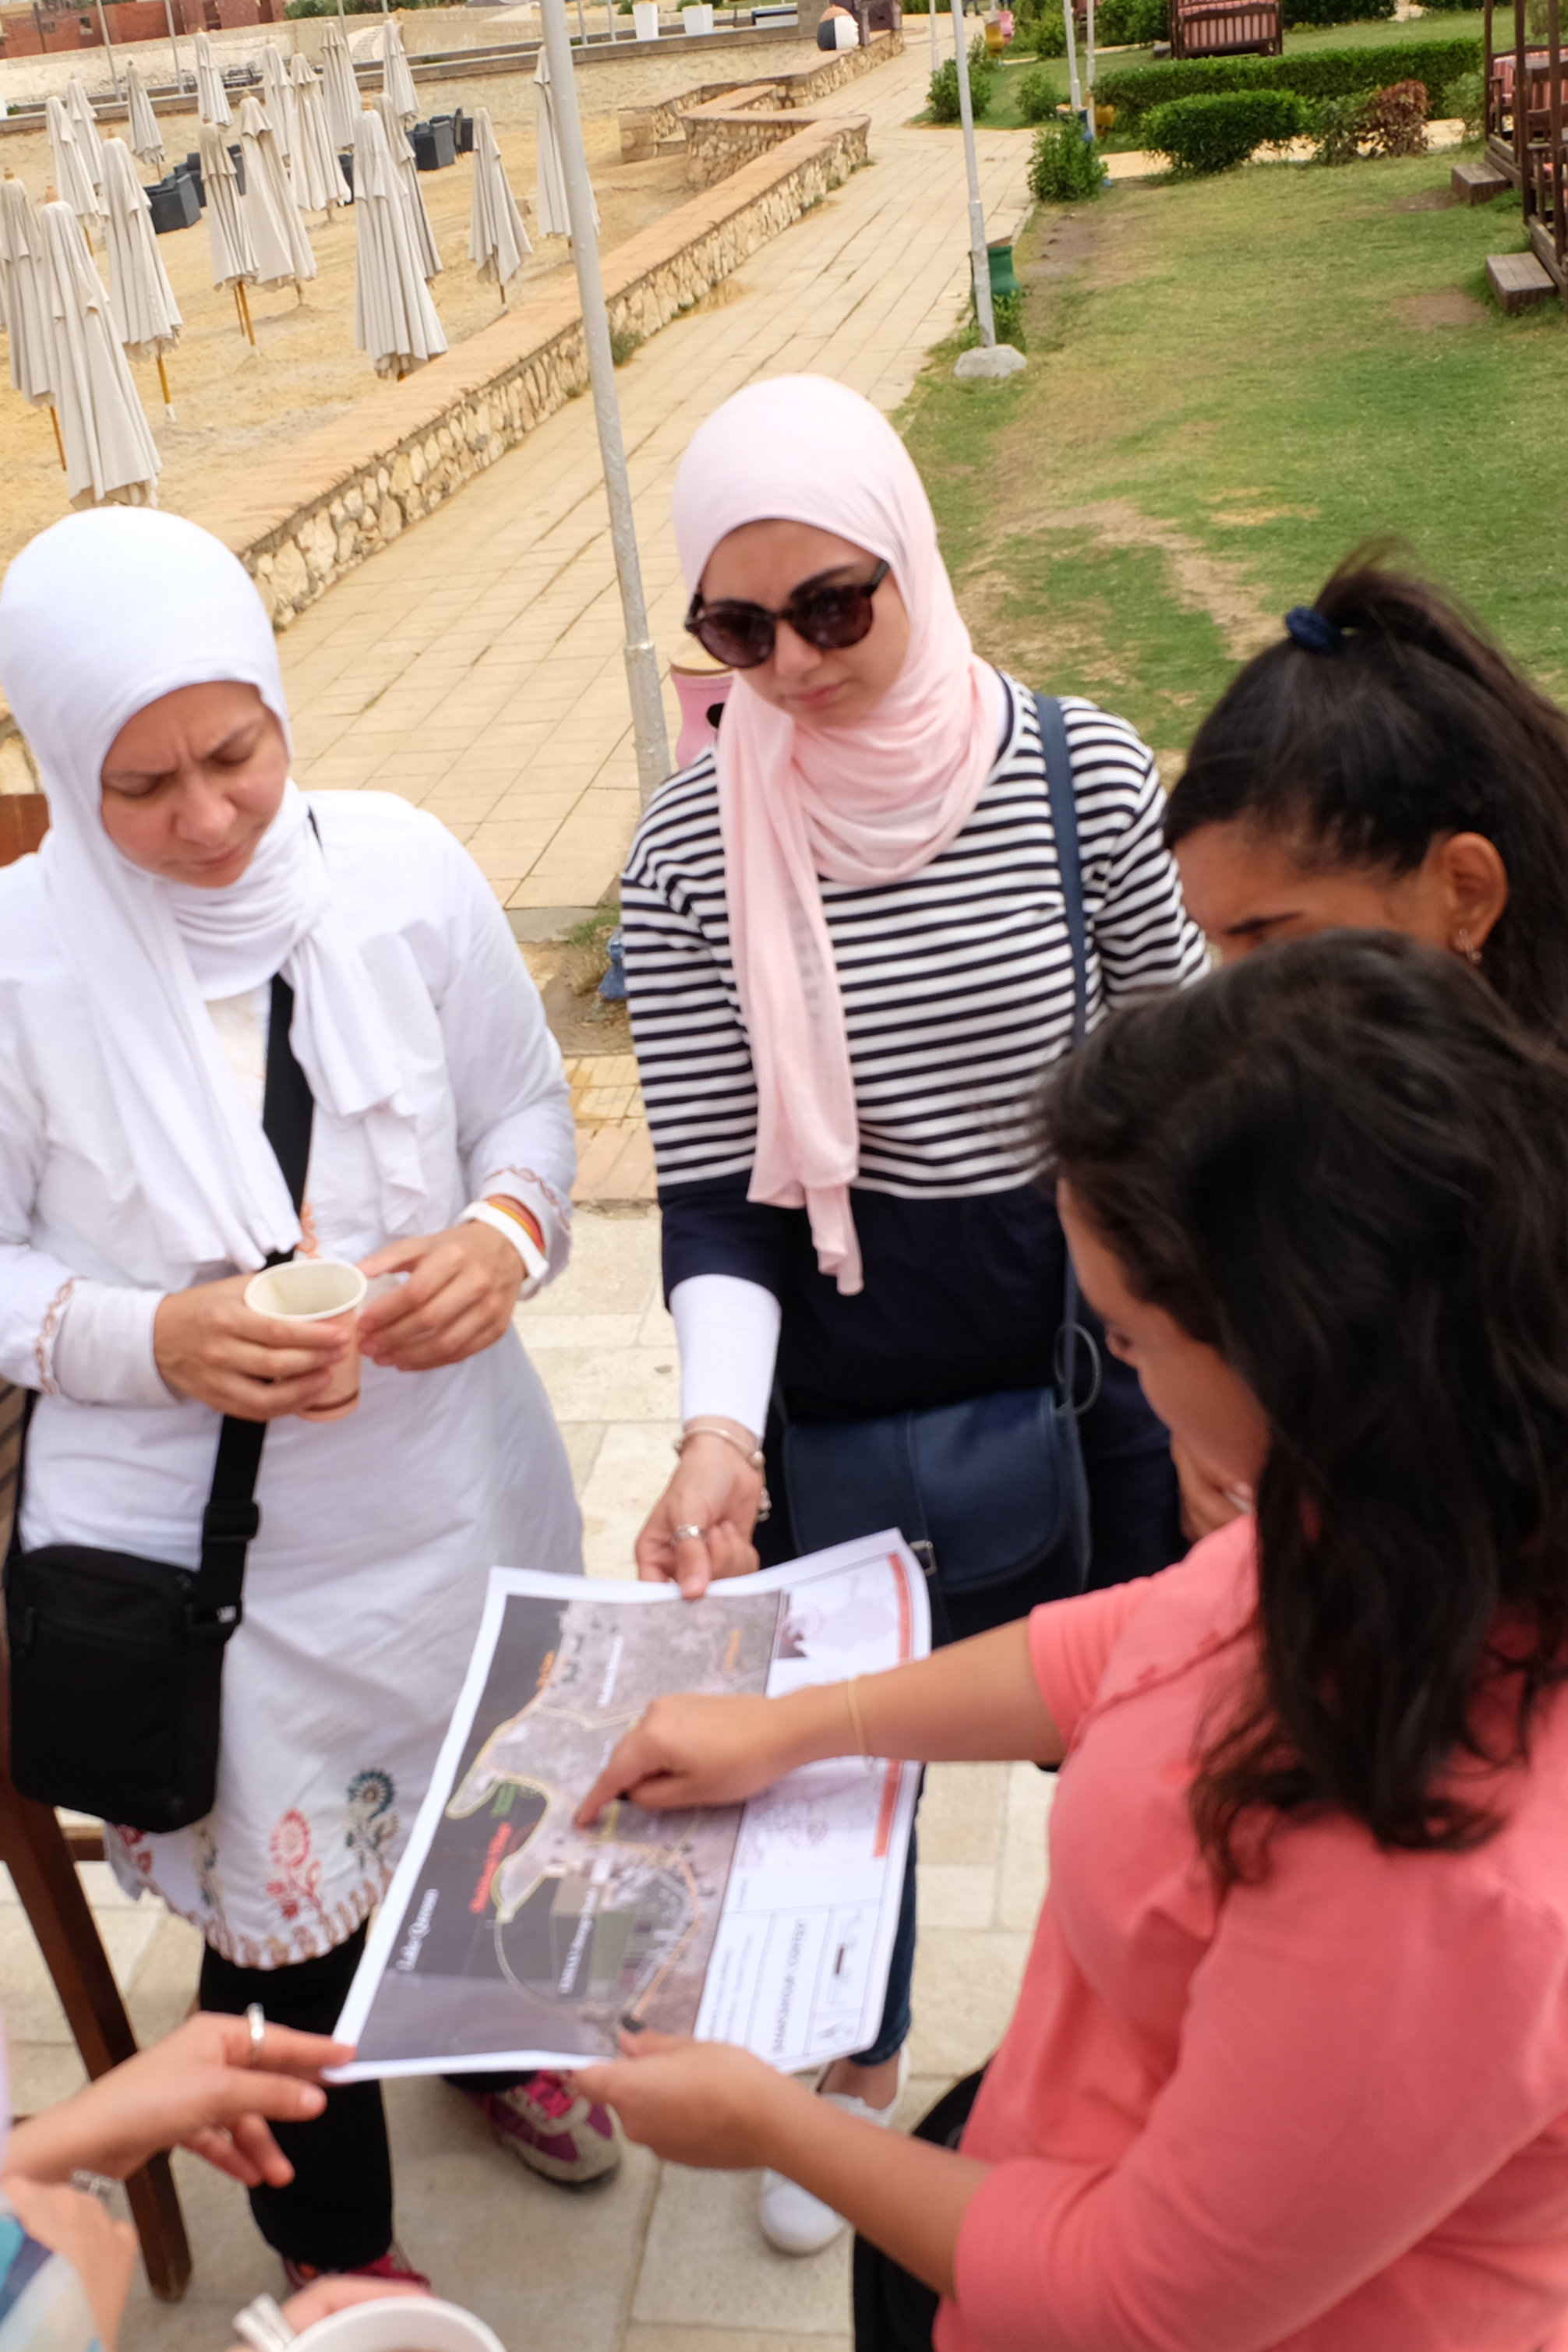 Fayoum field trip: Exploring the State of the Environment in Shakshouk village